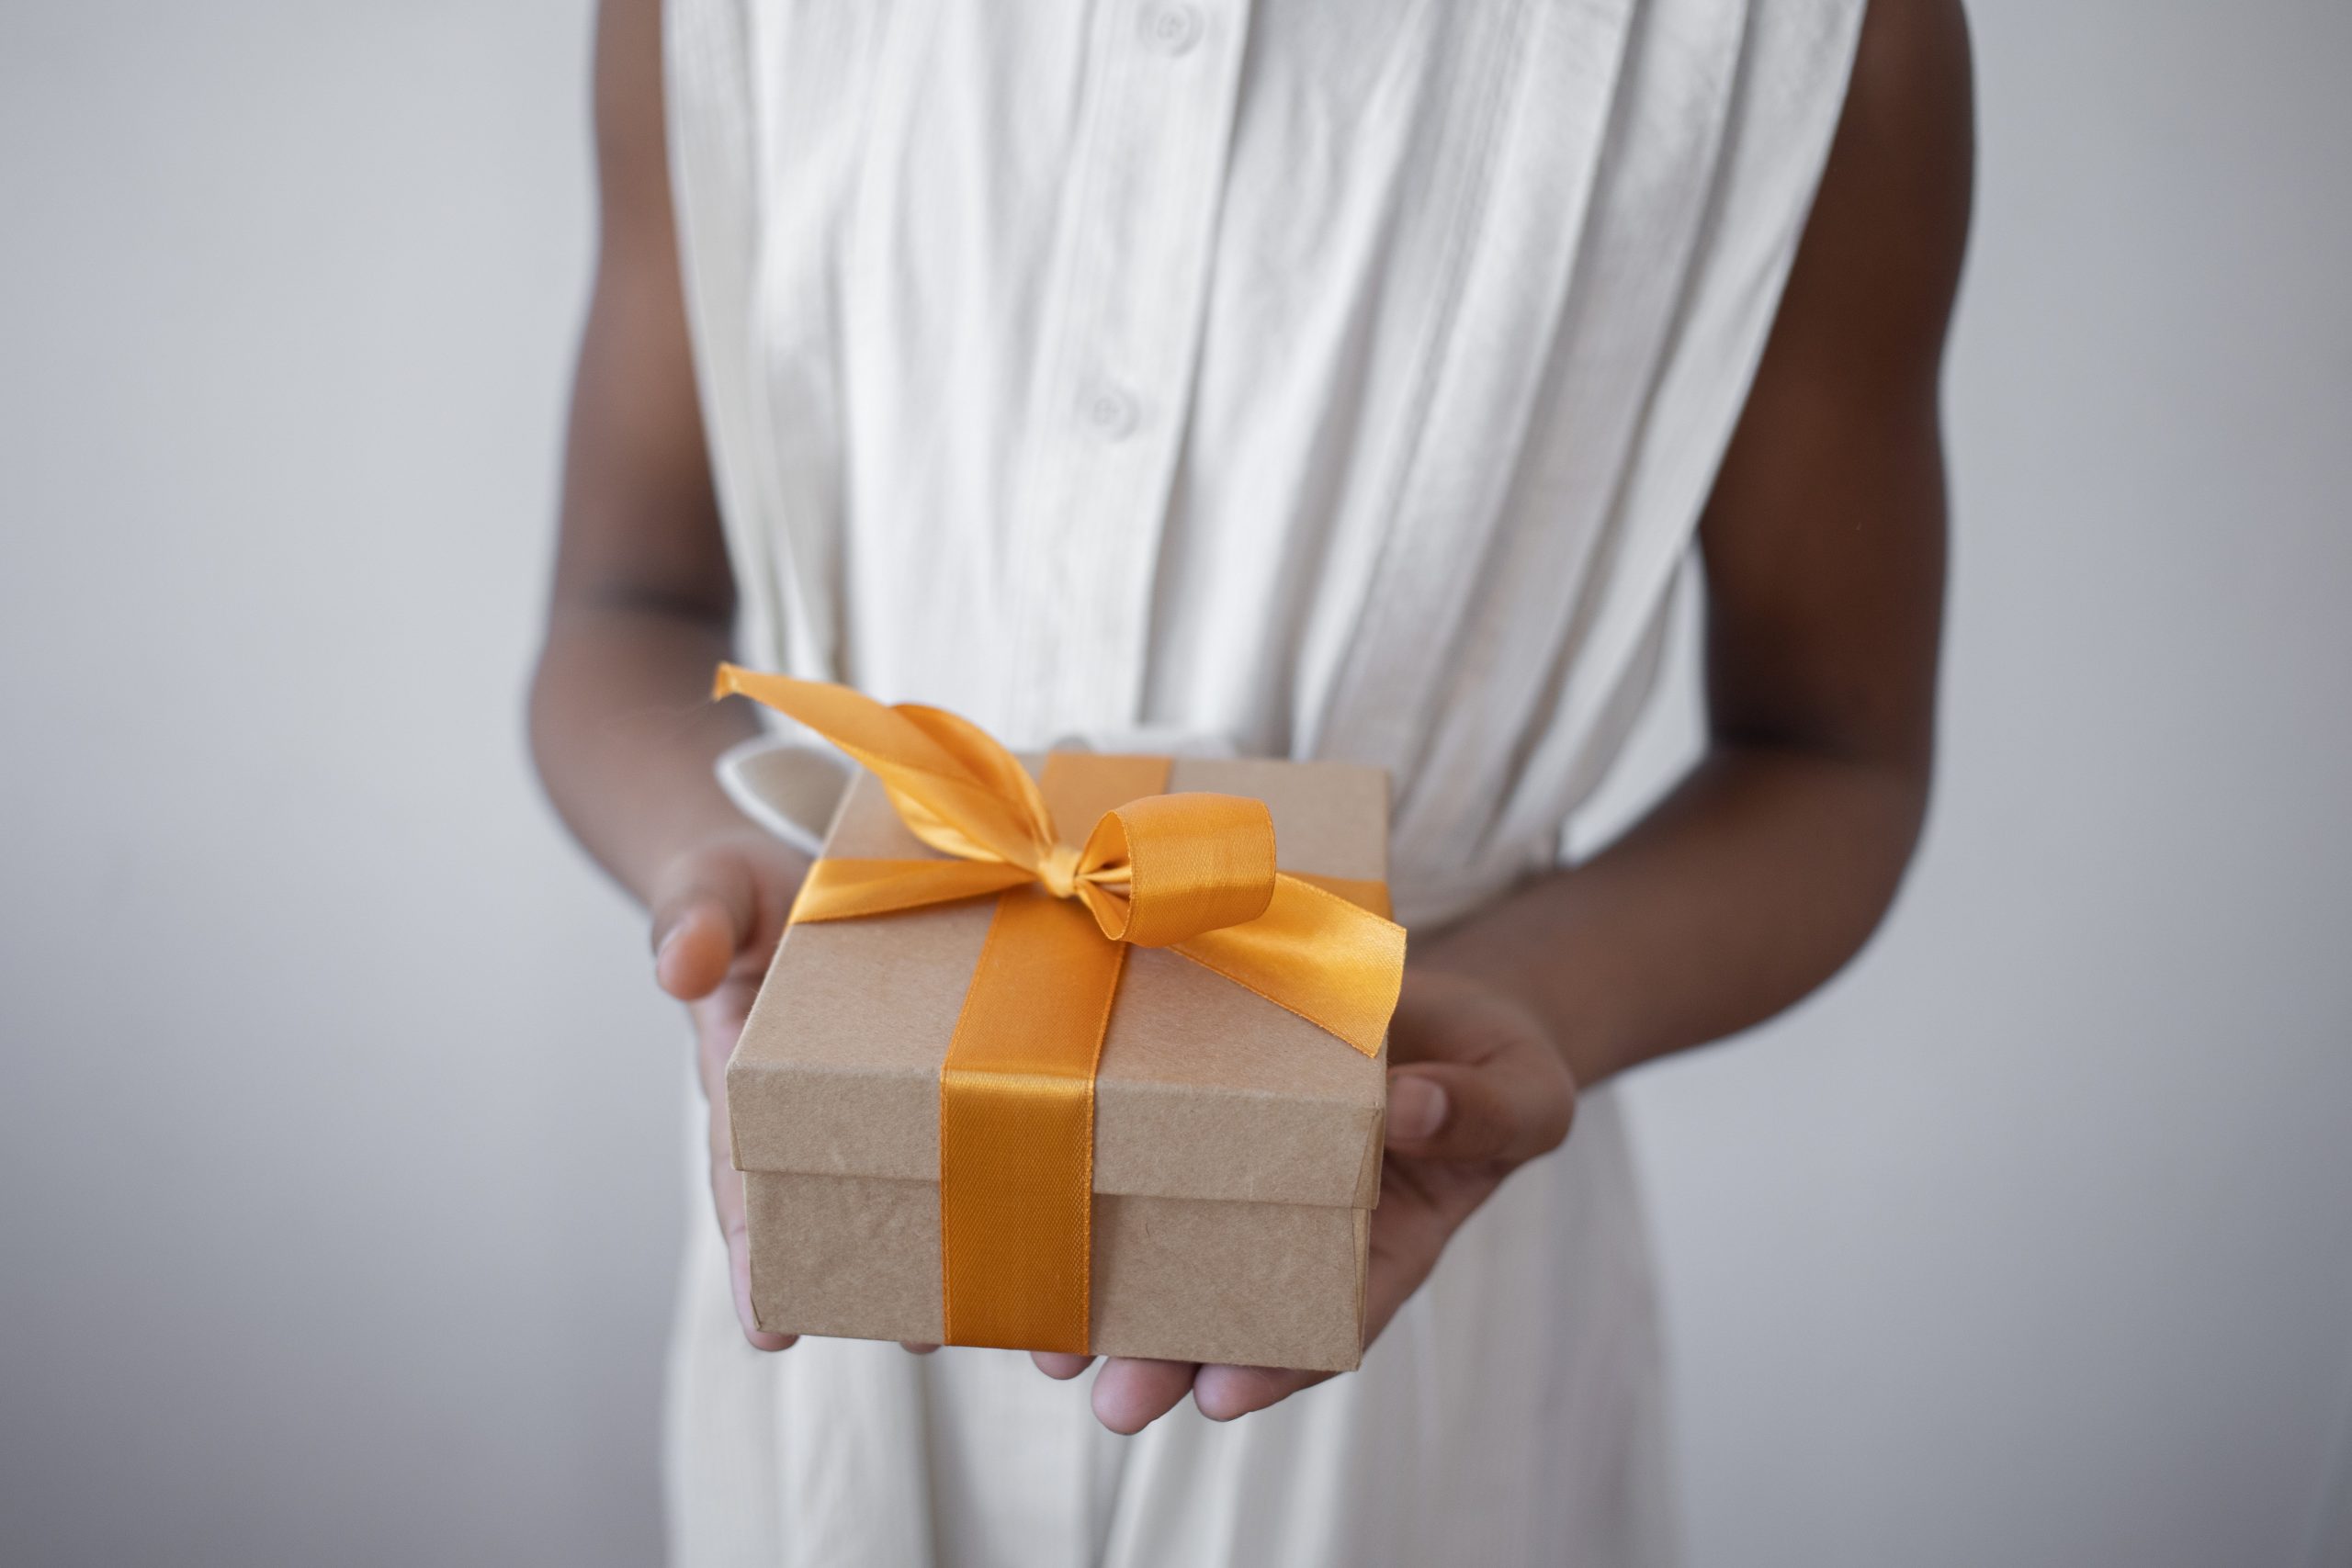 An image of someone gifting.